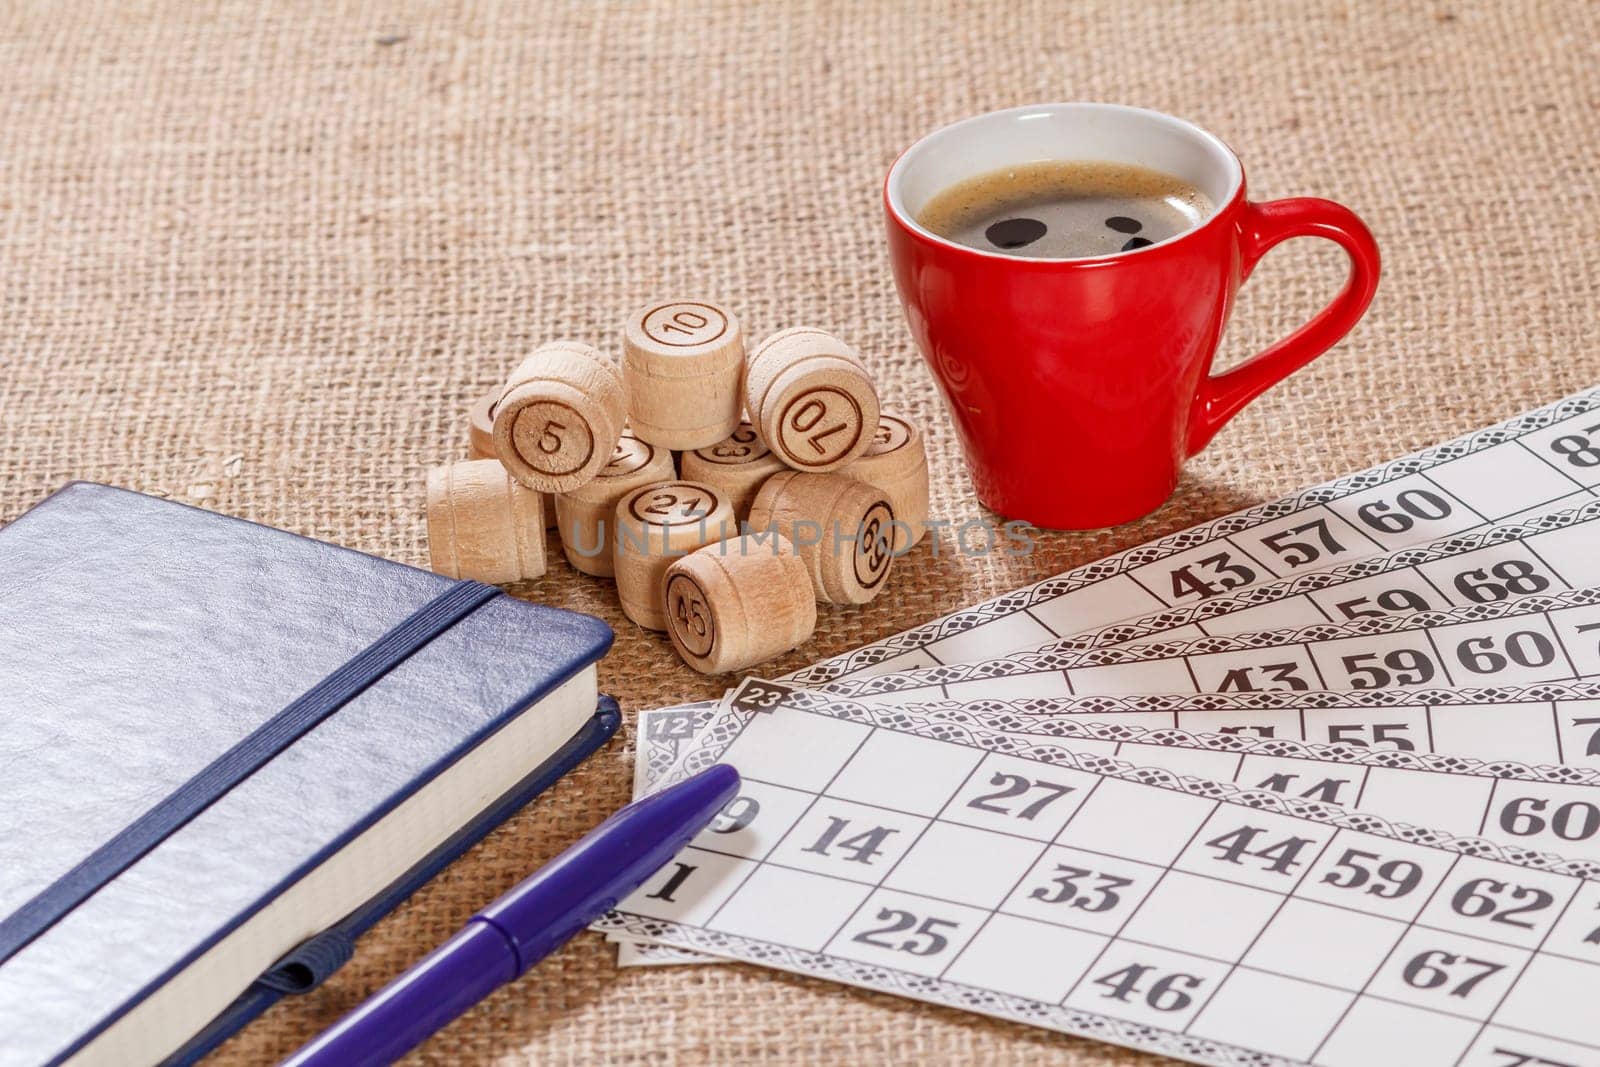 Board game lotto on sackcloth. Wooden lotto barrels and game cards for a game in lotto with a cup of coffee and a notebook with pen.